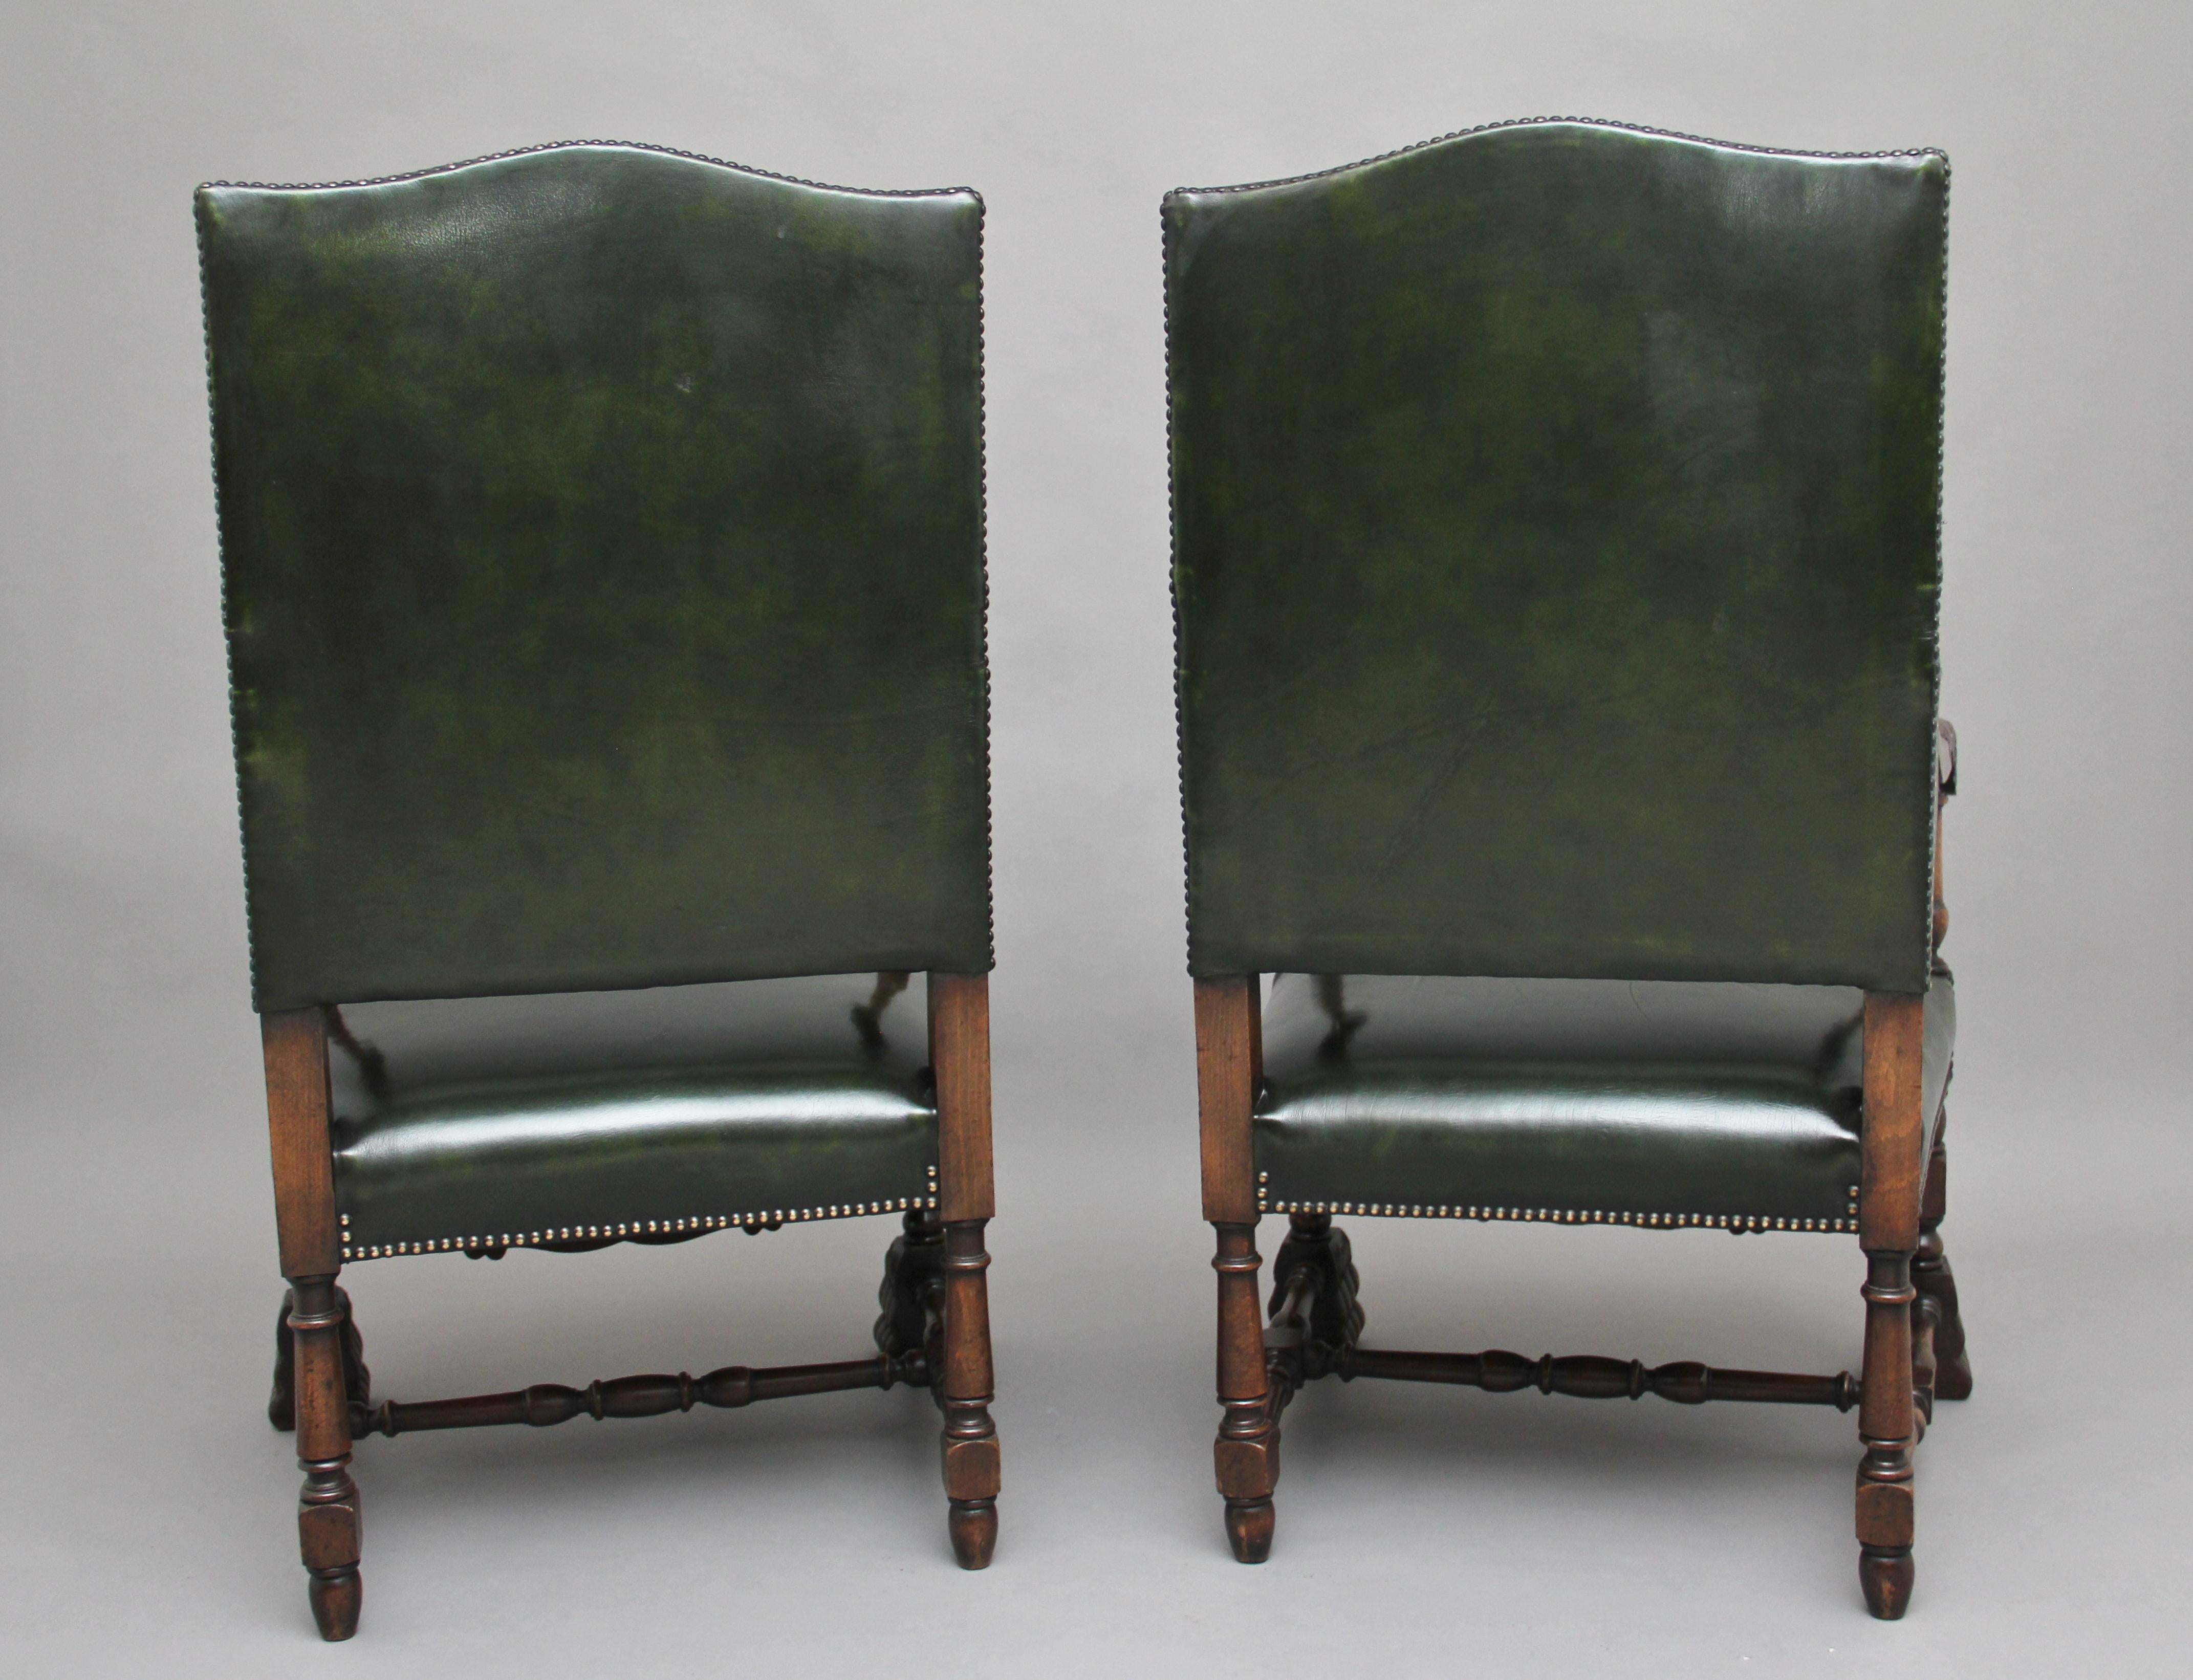 British Pair of Early 20th Century Carved Armchairs in the Carolean Style